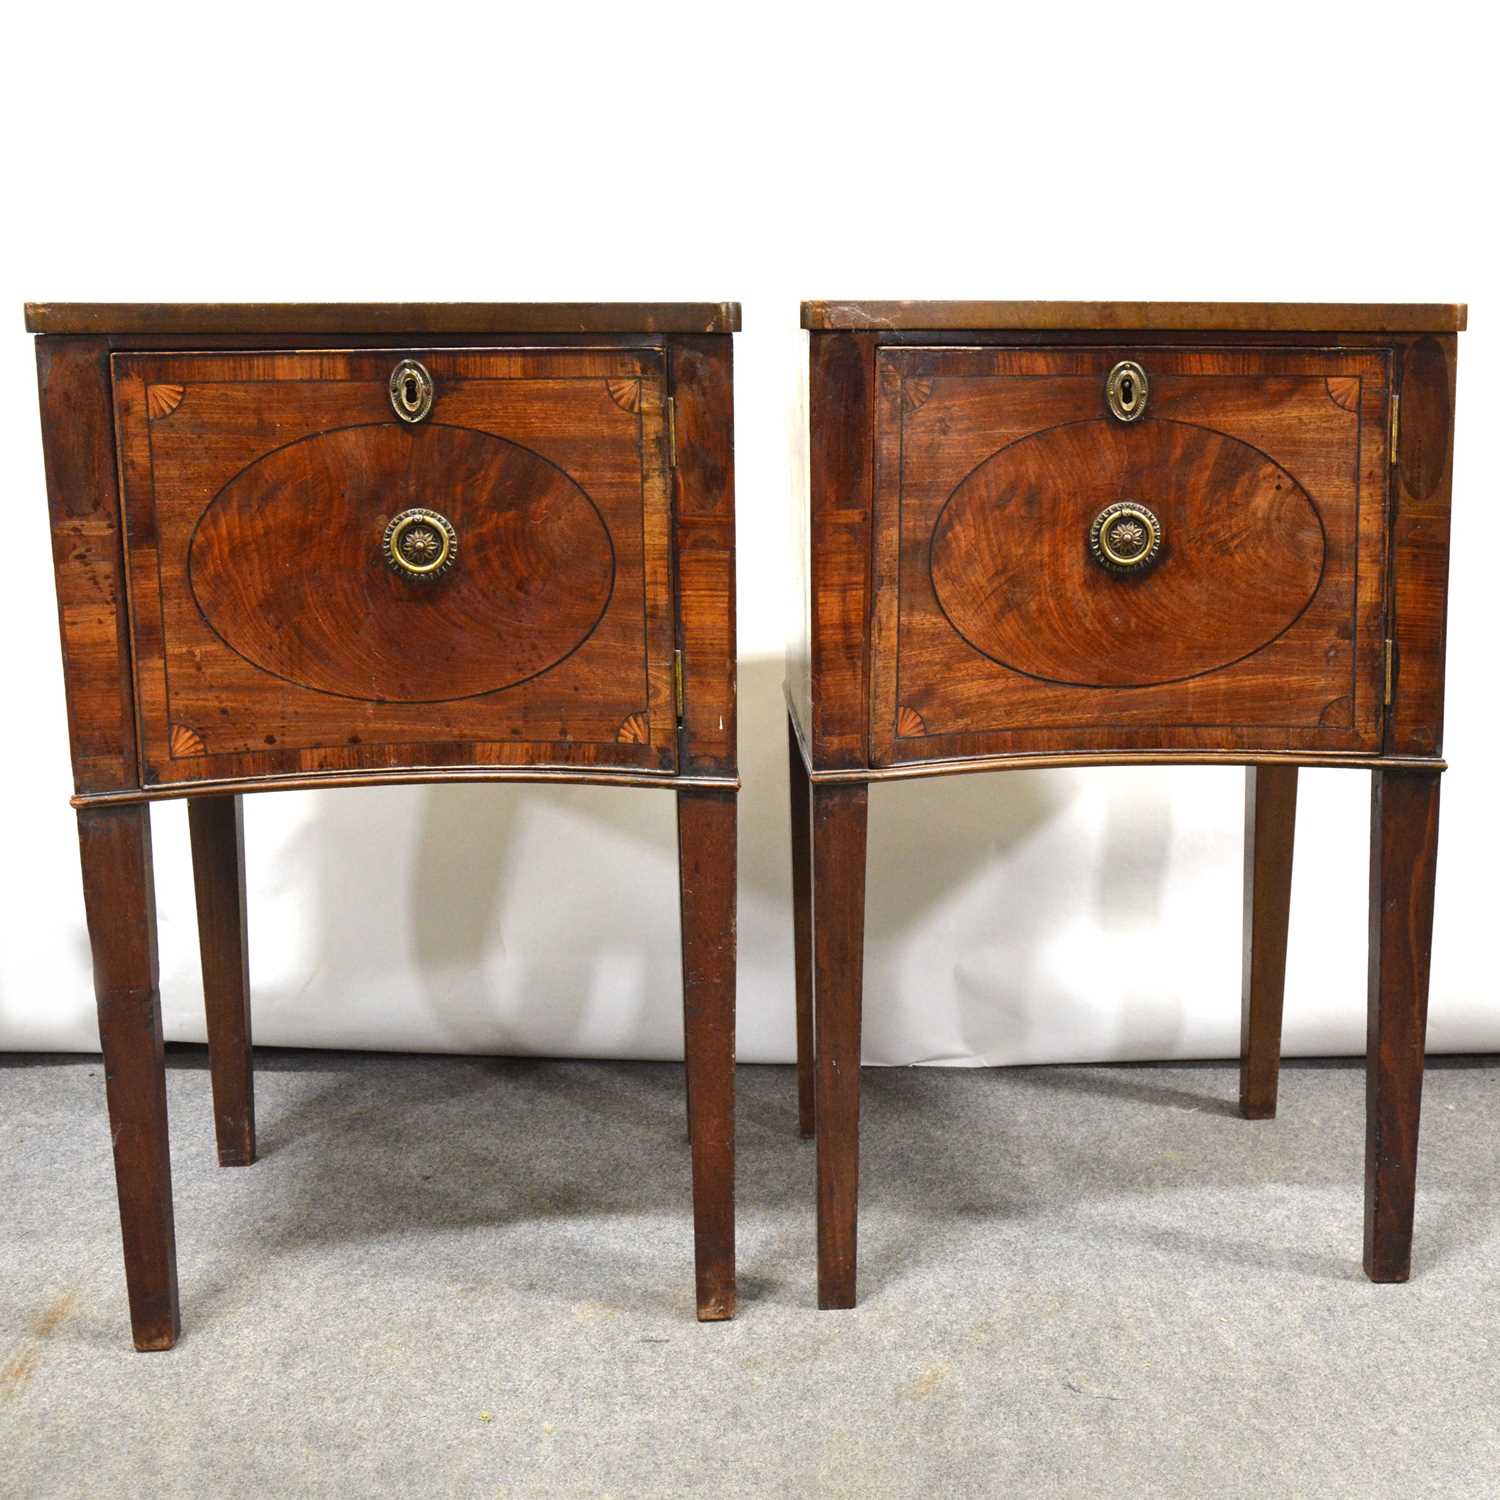 Pair of Victorian mahogany bedside cupboards